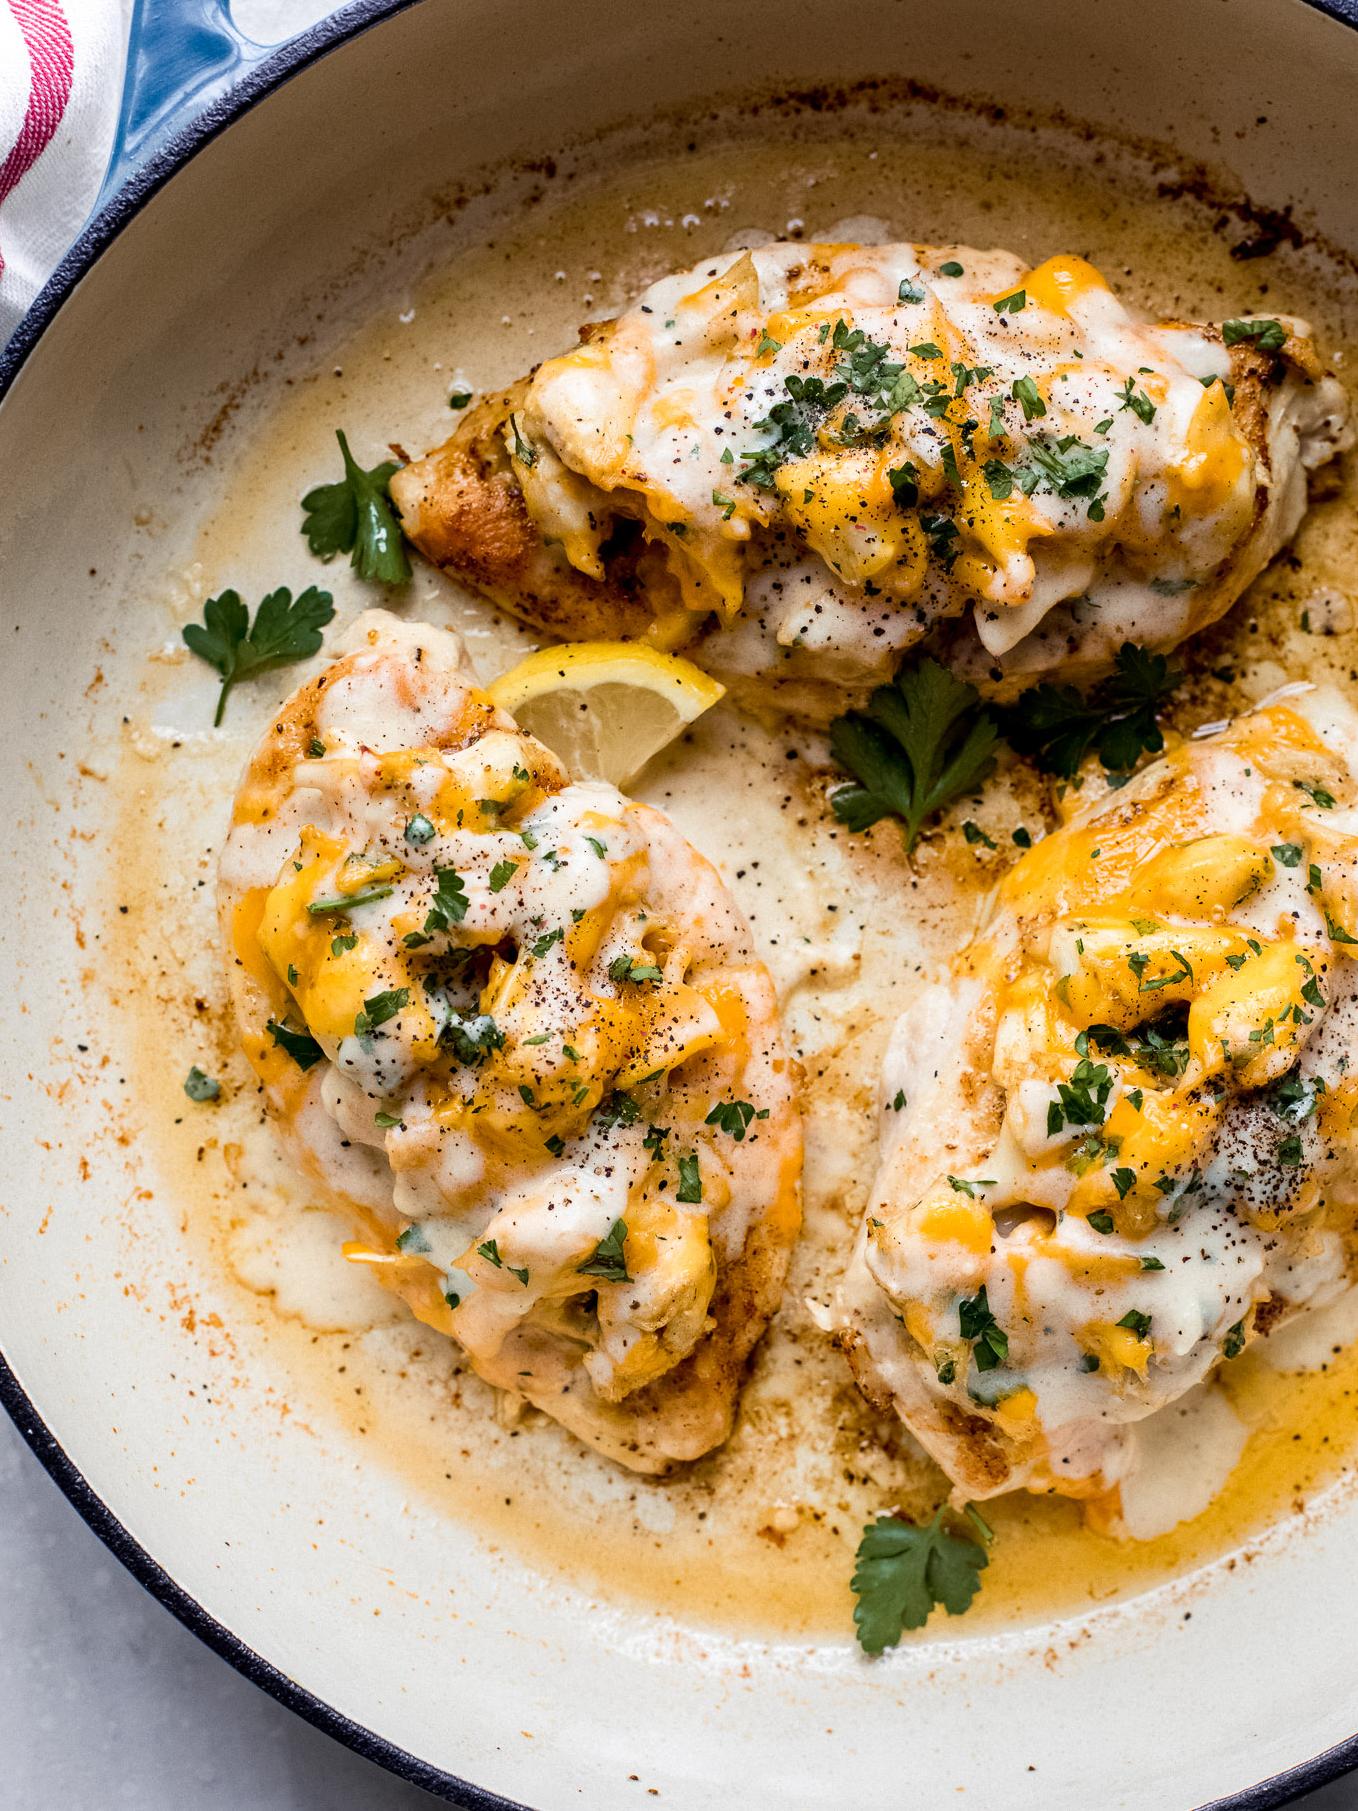  Don't be chicken, give this savory Chesapeake dish a try!